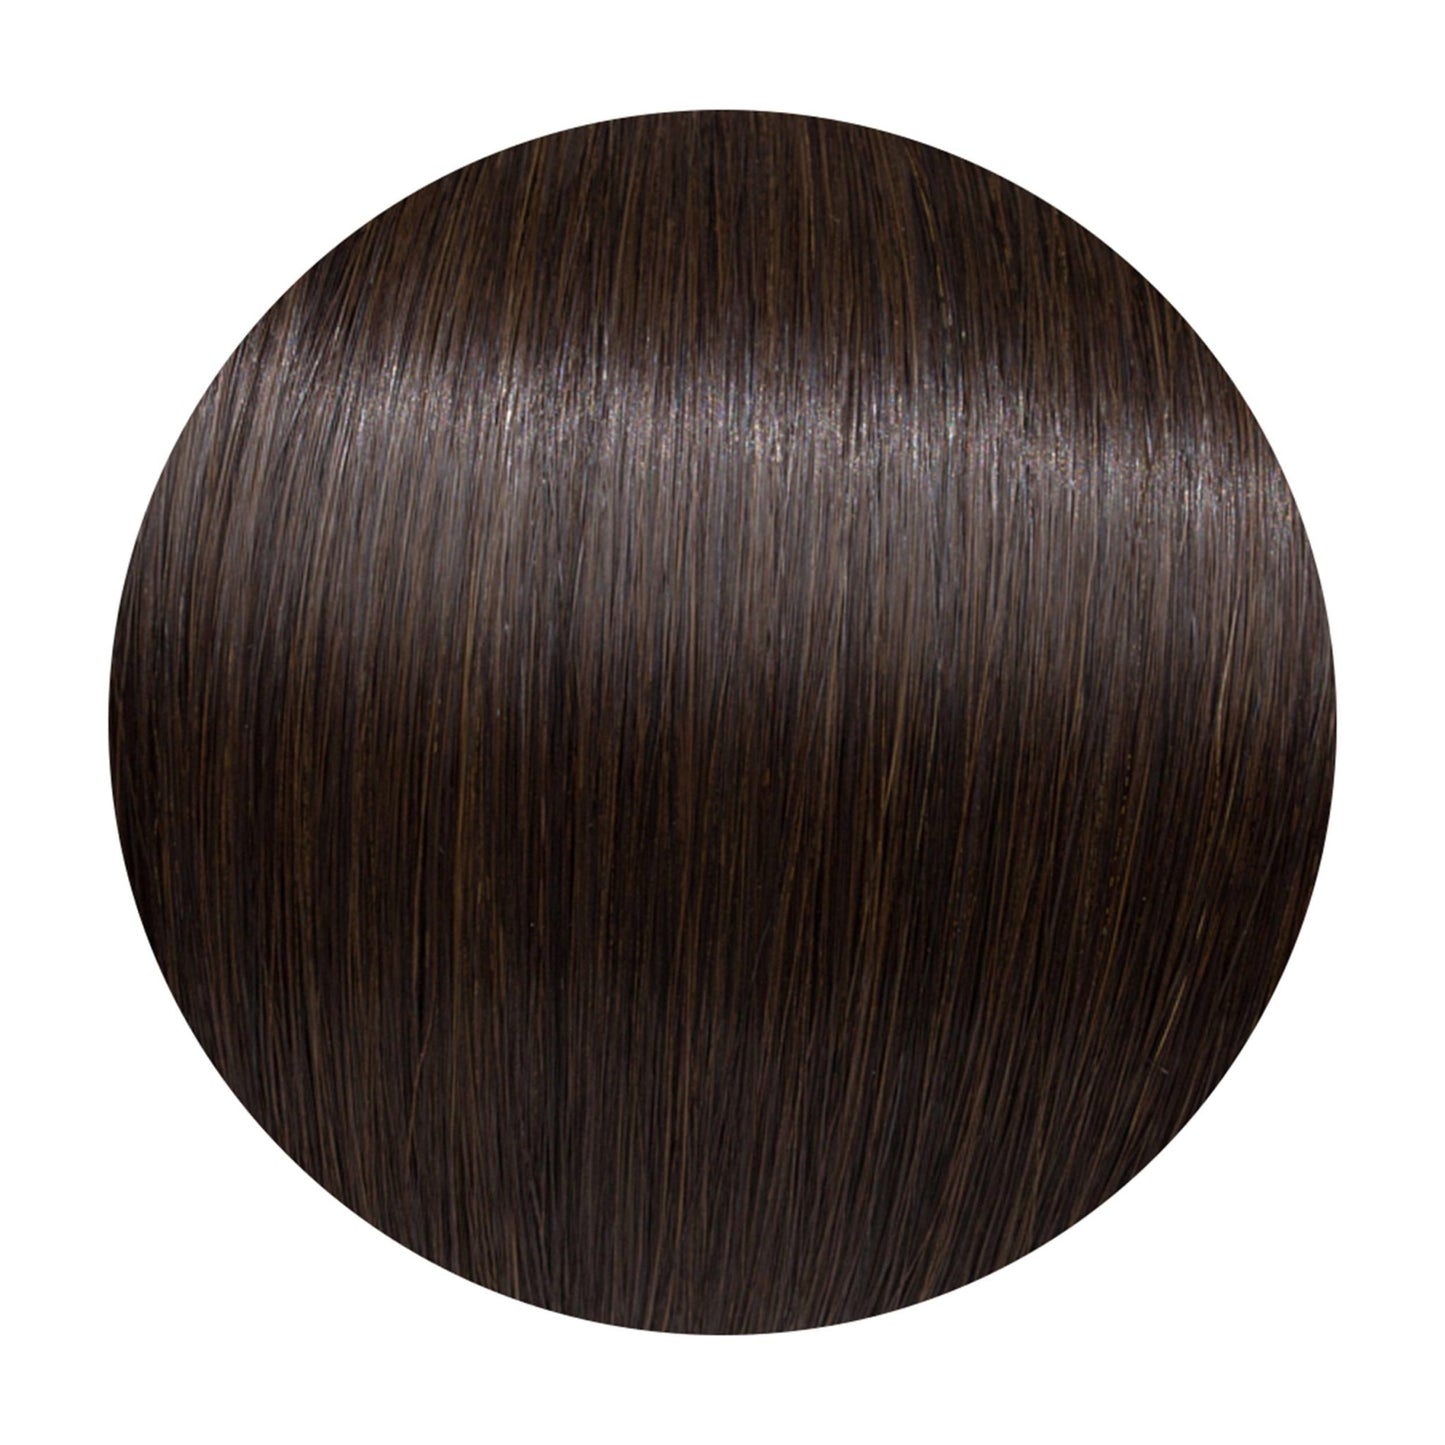 Seamless1 Caviar Human Hair in 5 Piece - shelley and co